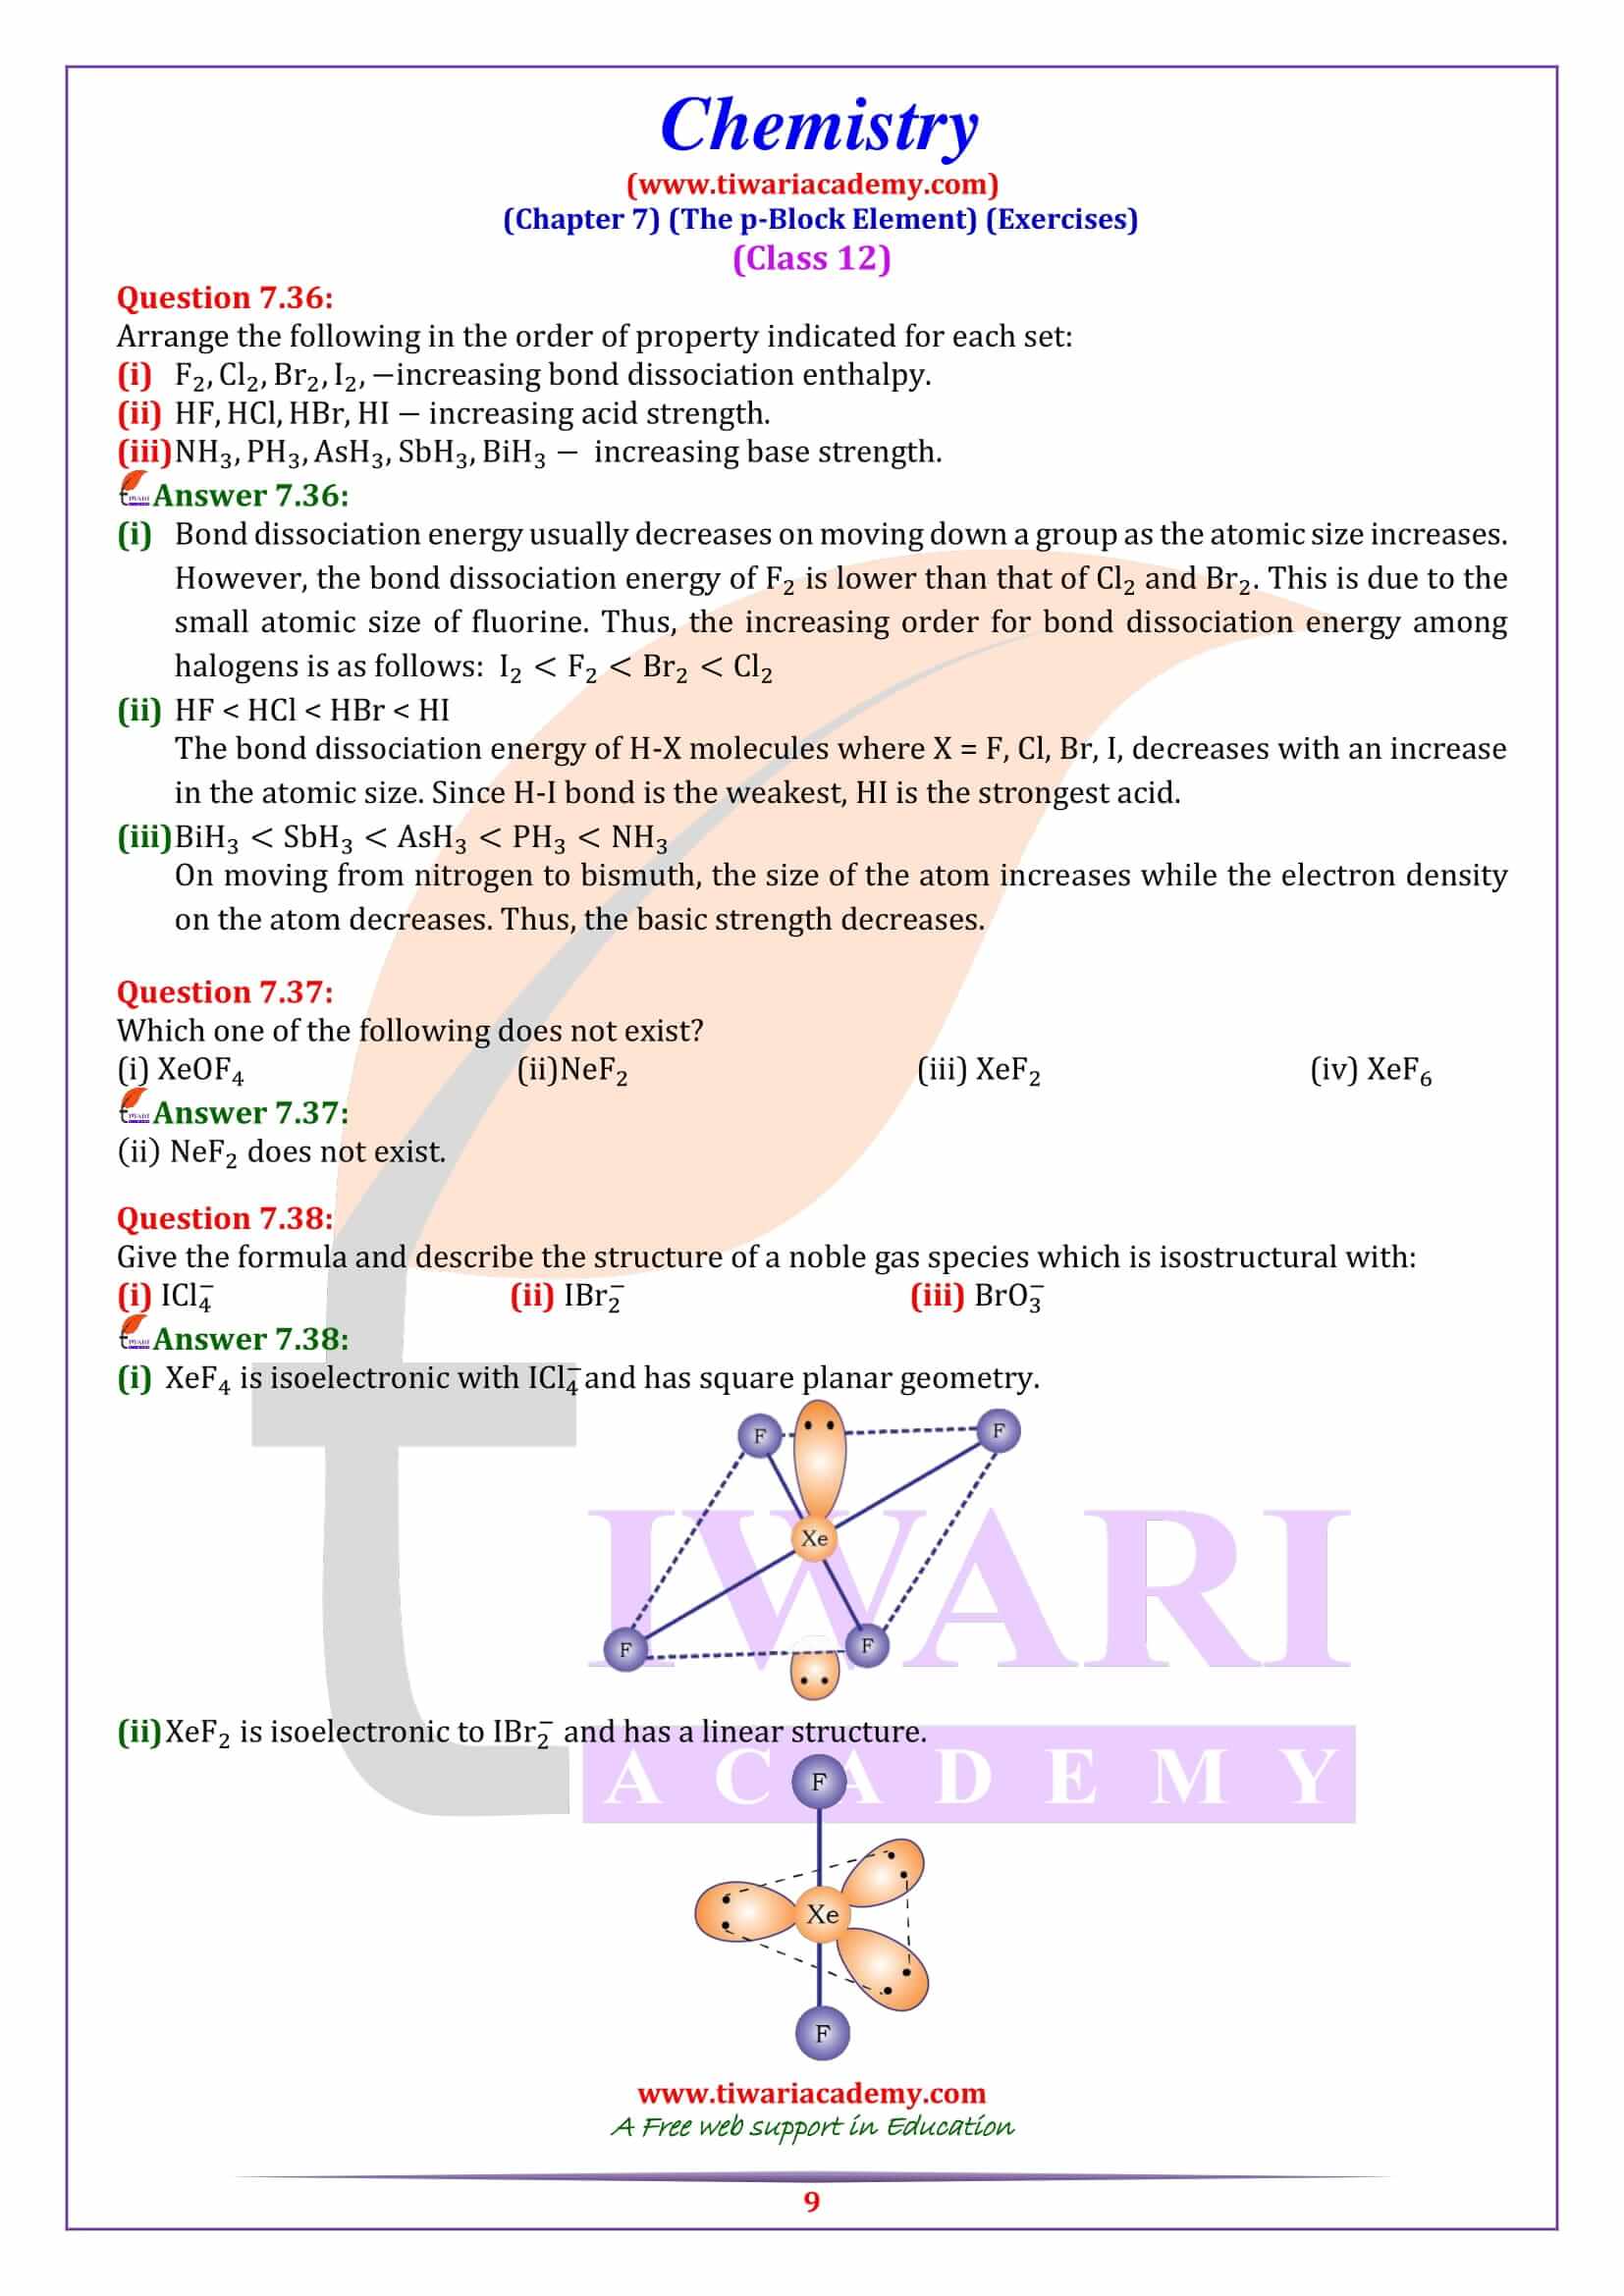 NCERT Solutions for Class 12 Chemistry Chapter 7 exercises